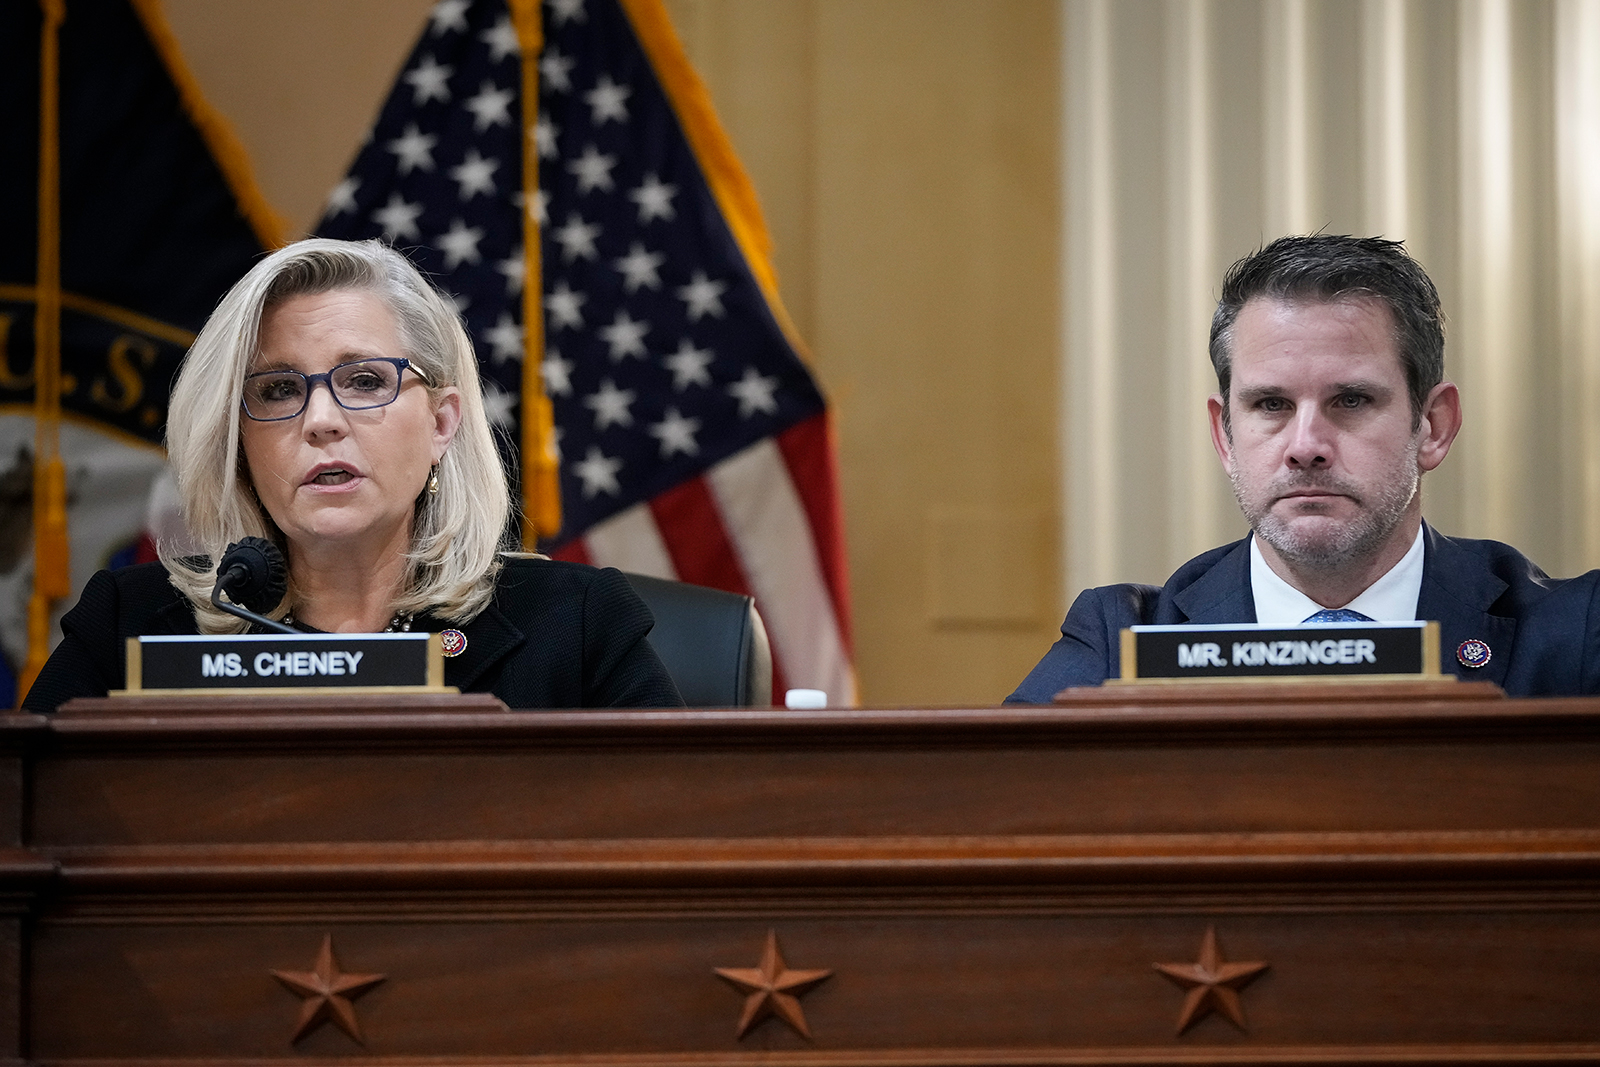 Rep. Liz Cheney (R-WY), vice-chair of the select committee investigating the January 6 attack on the Capitol, and Rep. Adam Kinzinger (R-IL) listen during a committee meeting on Capitol Hill on December 1, in Washington, DC. (Drew Angerer/Getty Images)